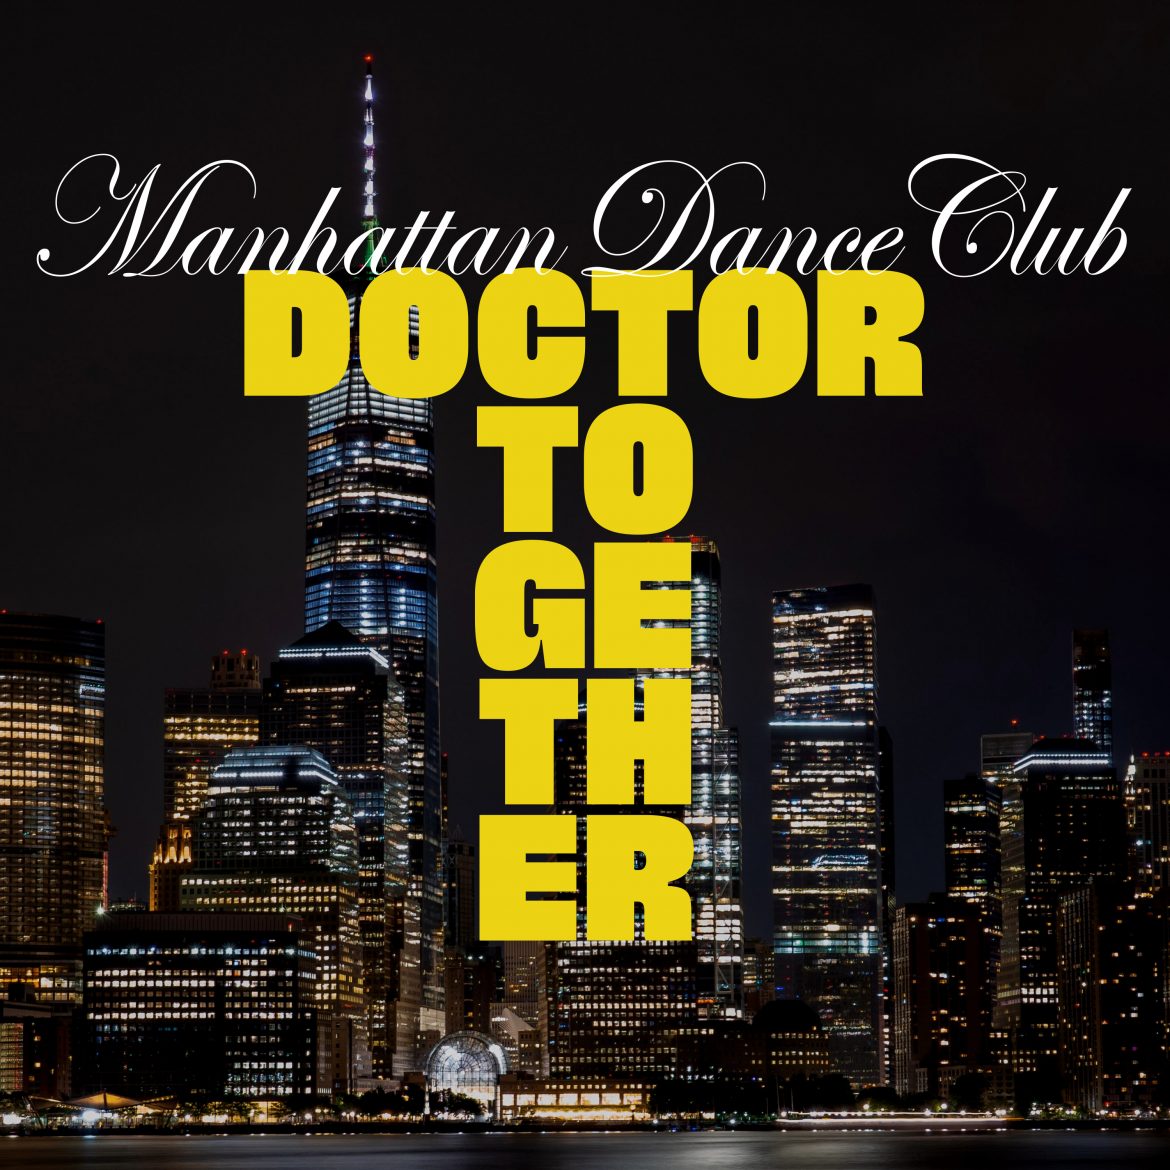 The new single ‘Manhattan Dance Club’ from ‘Doctor Together’ with it’s huge and melodic sound and spacey dance vibes is on the playlist now.